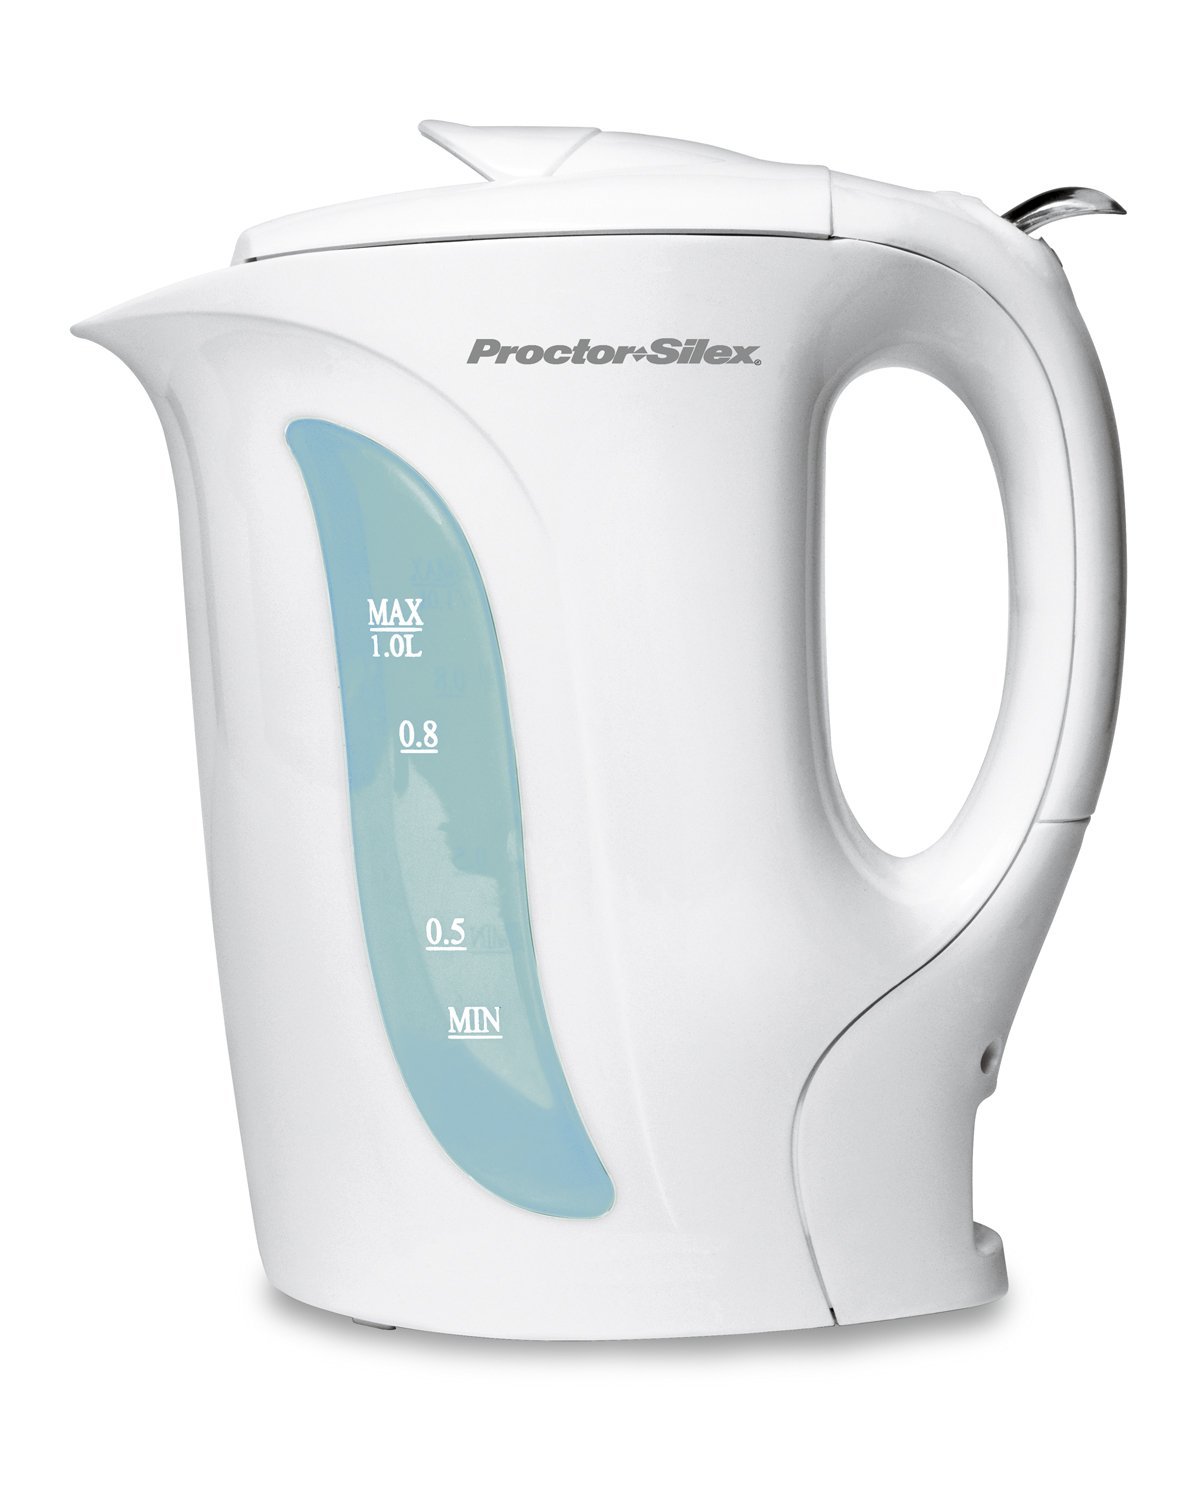 Proctor Silex K2070ya Electric Kettle Price And Reviews